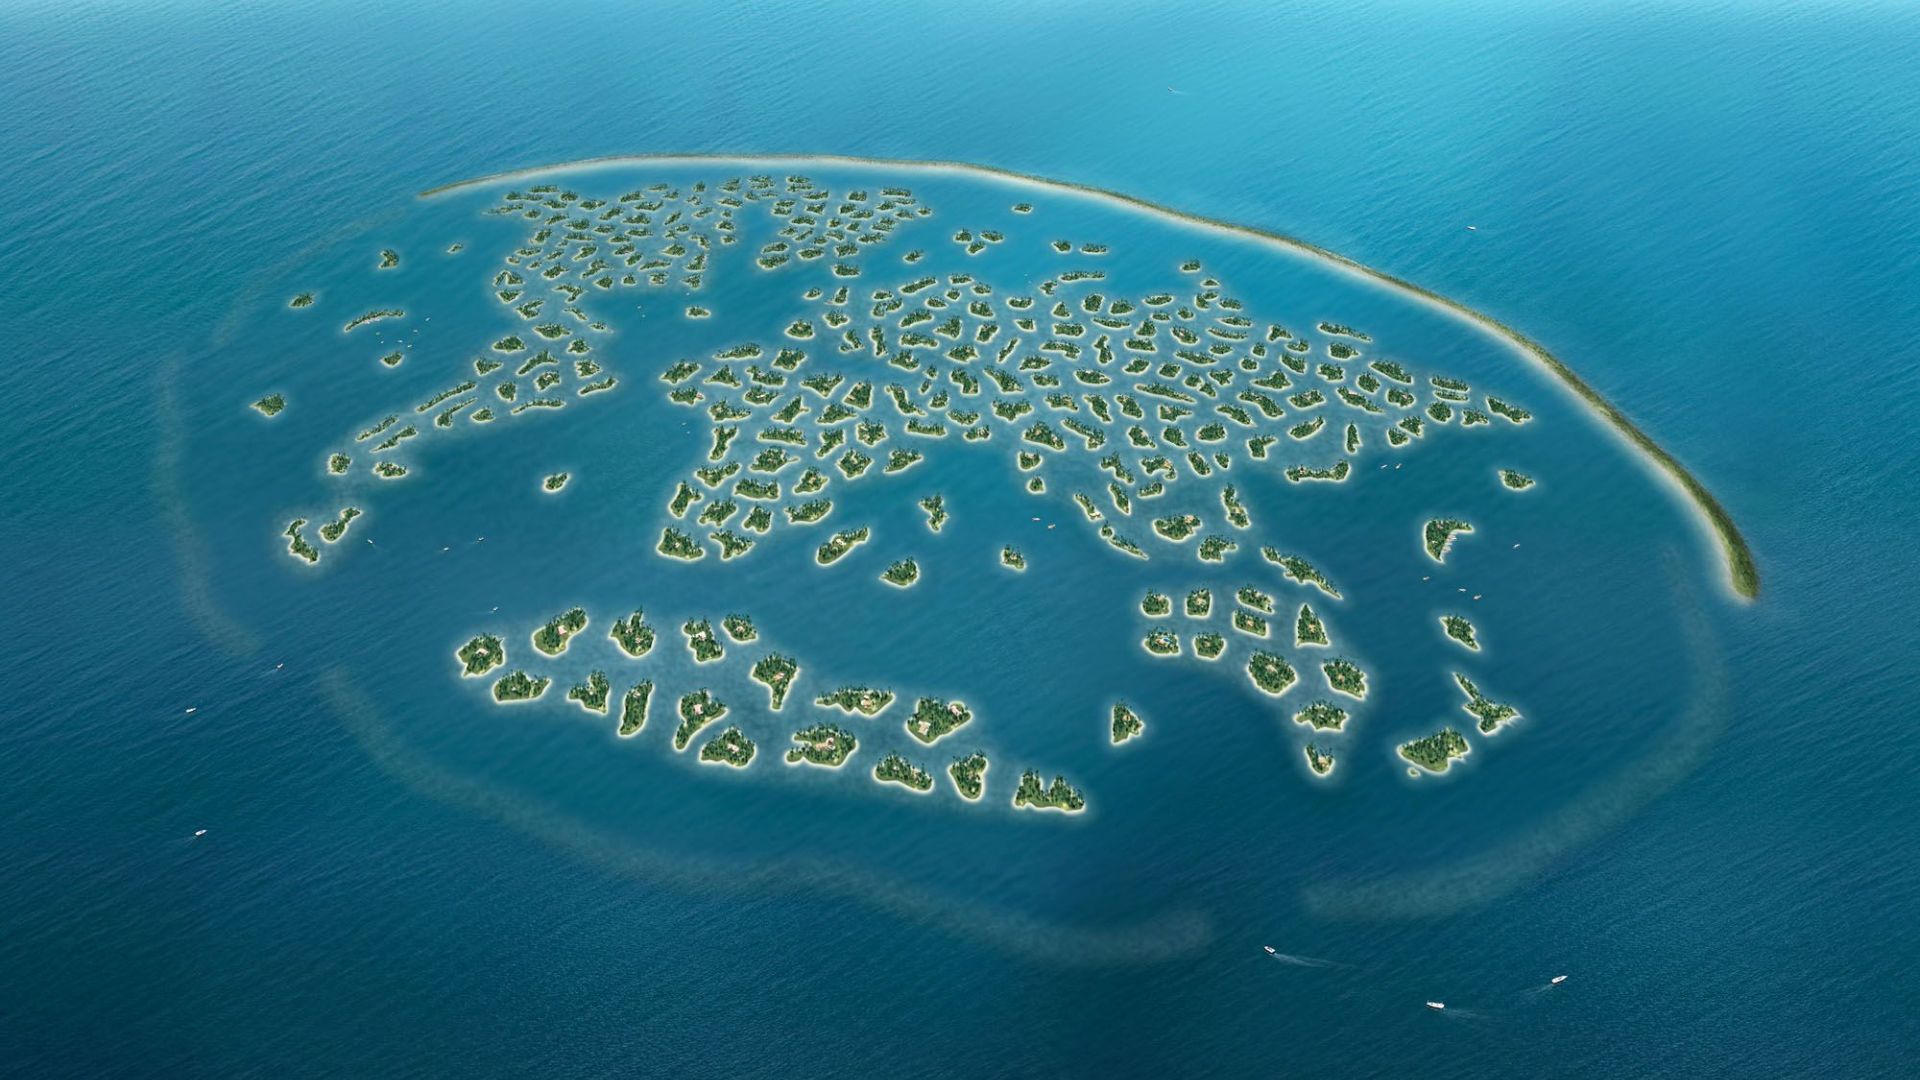 About The World Islands